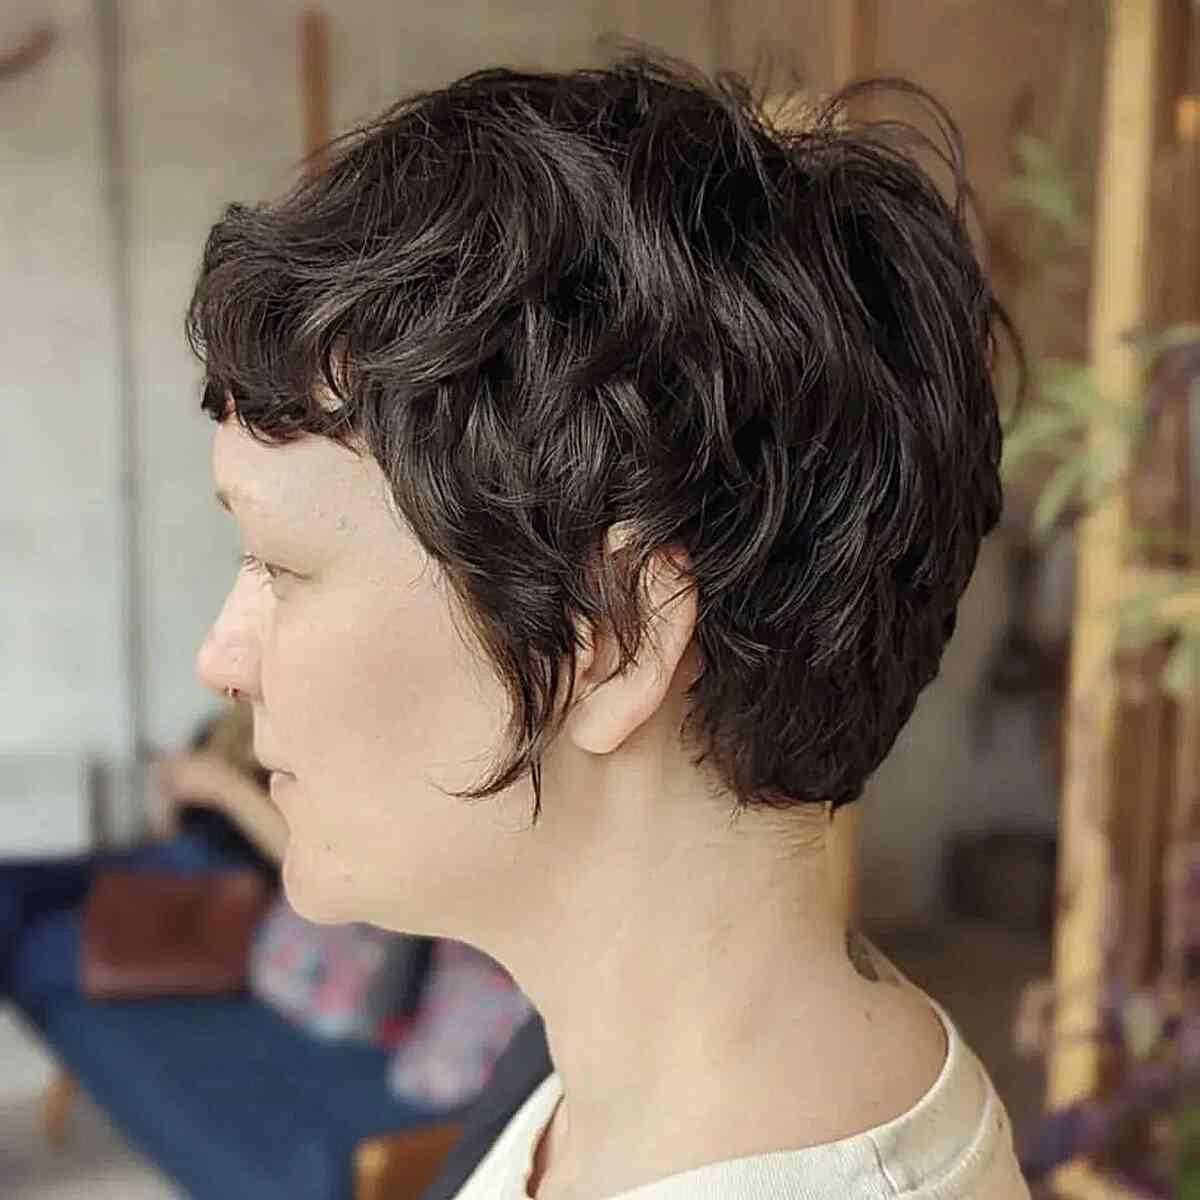 Nape-Length Soft Wixie with Short Wavy Bangs